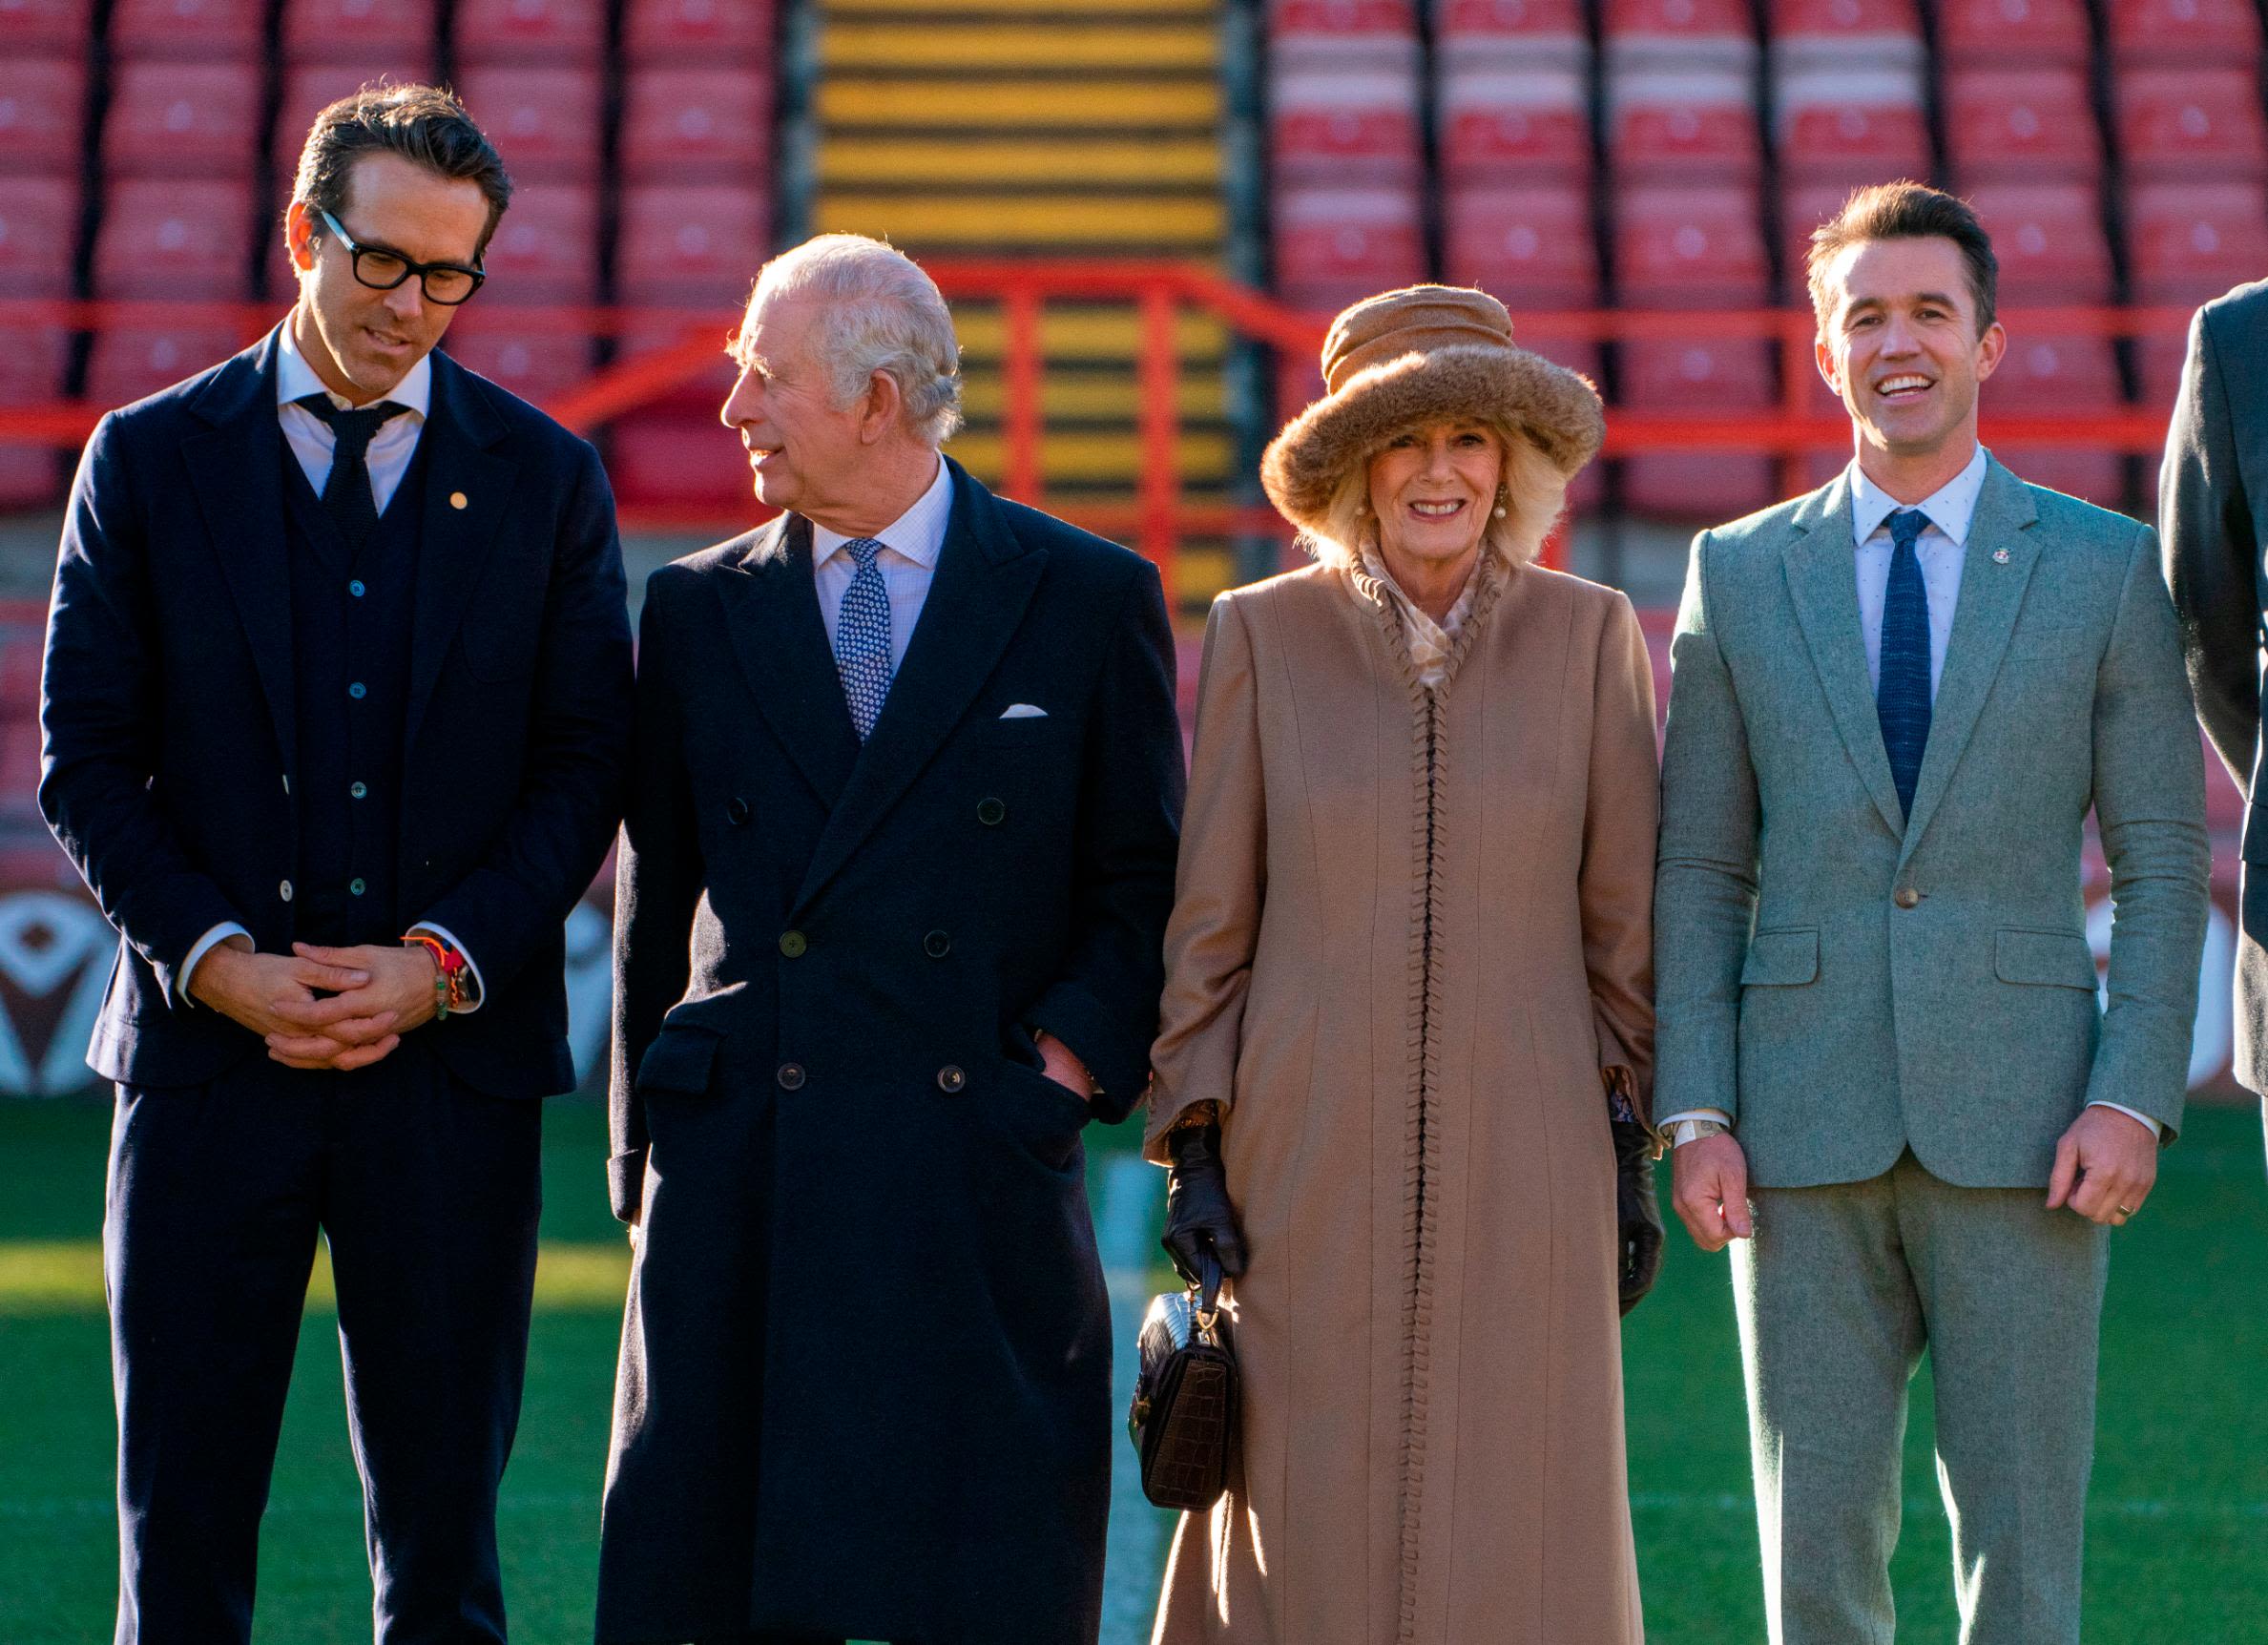 King Charles visits Wrexham AFC, the soccer club owned by Ryan Reynolds and  Rob McElhenney